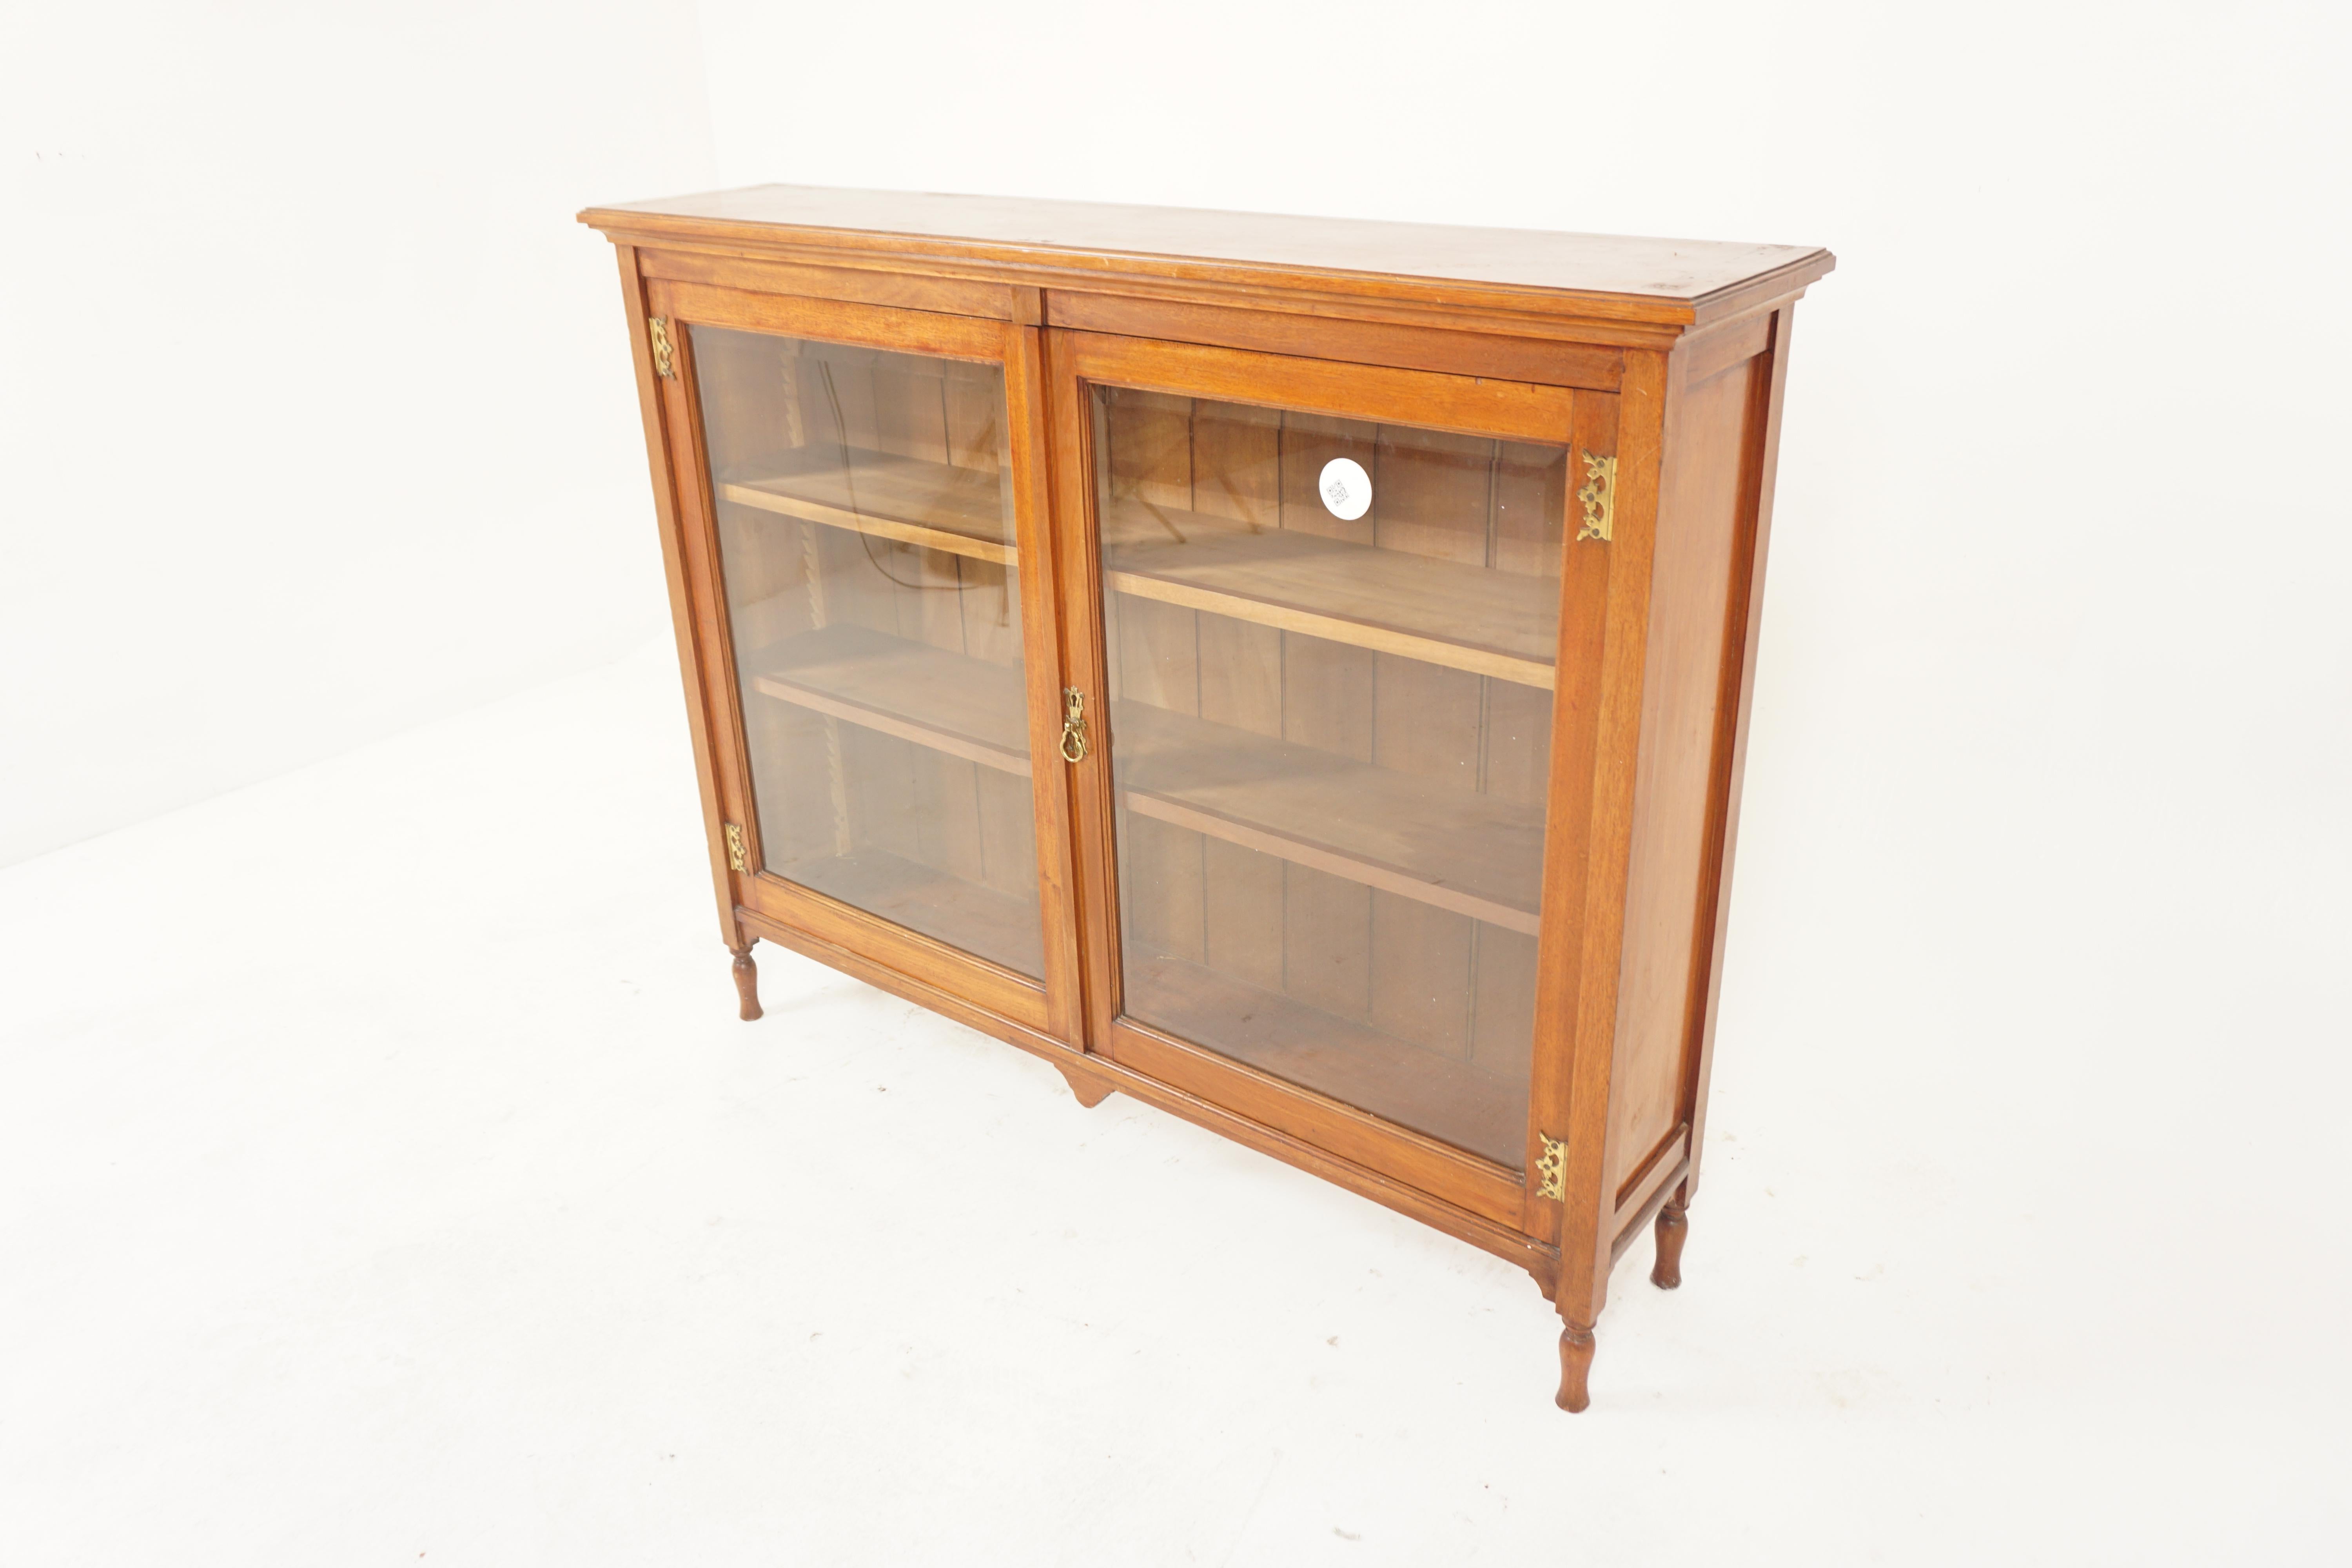 Antique Arts & Crafts Walnut Bookcase, Display Cabinet, Bevelled Glass, Scotland 1890, H1010

Solid Walnut
Original Finish
Rectangular moulded top
Pair of original bevelled glass doors
Exterior brass hinges
Cabinet when opened shows pair of